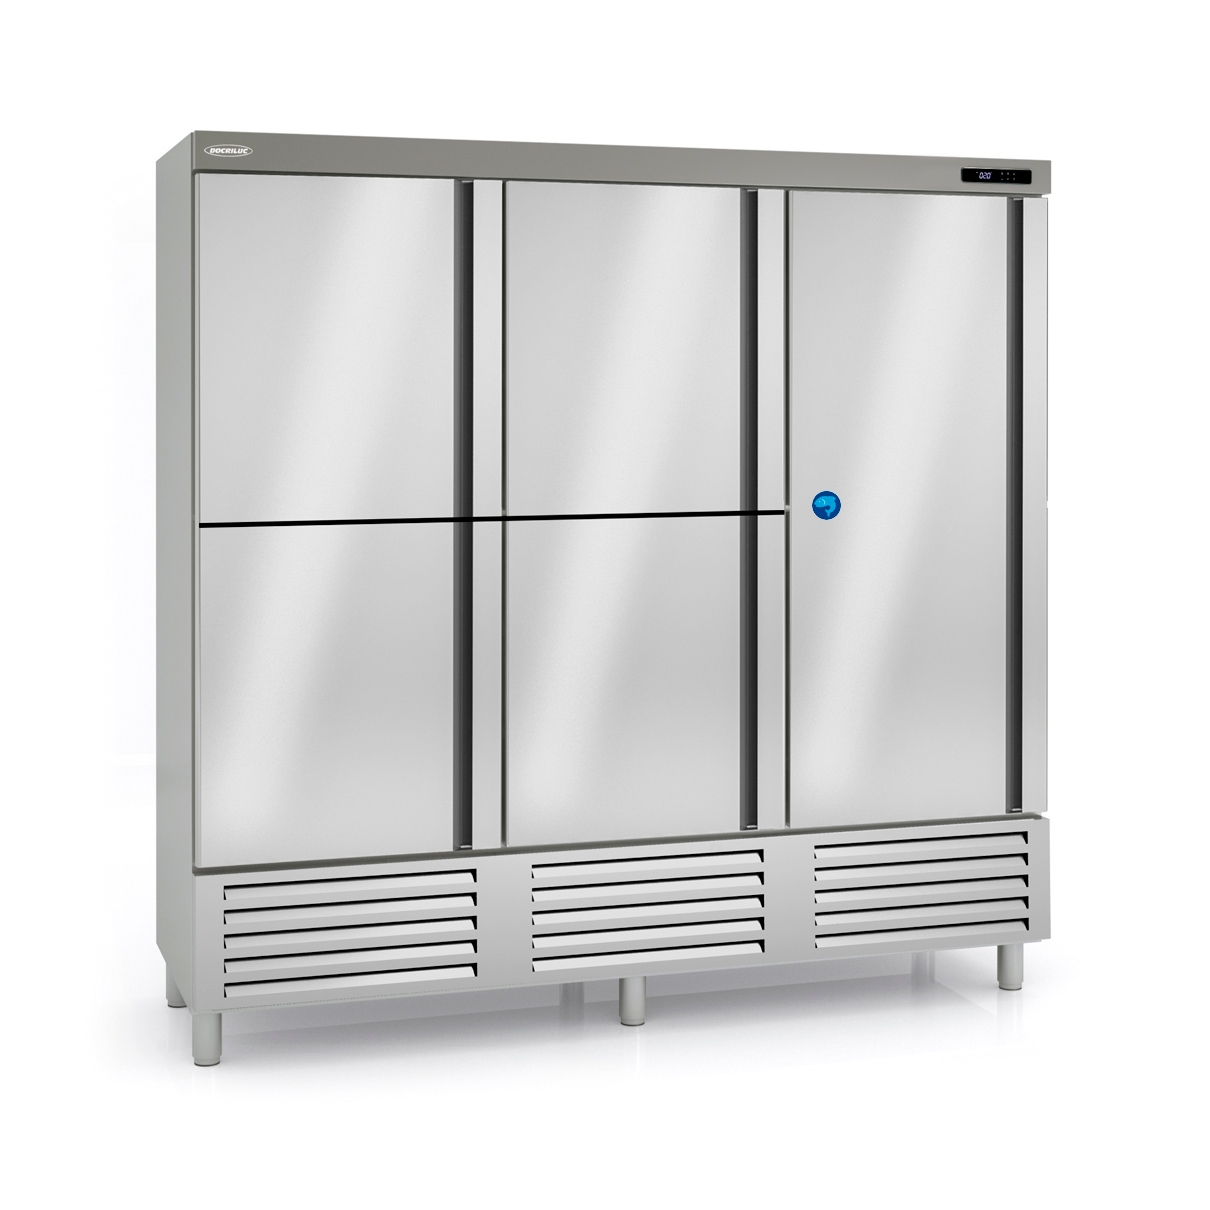 Snack Refrigerated Cabinet with Fish Department ARSP-210-5